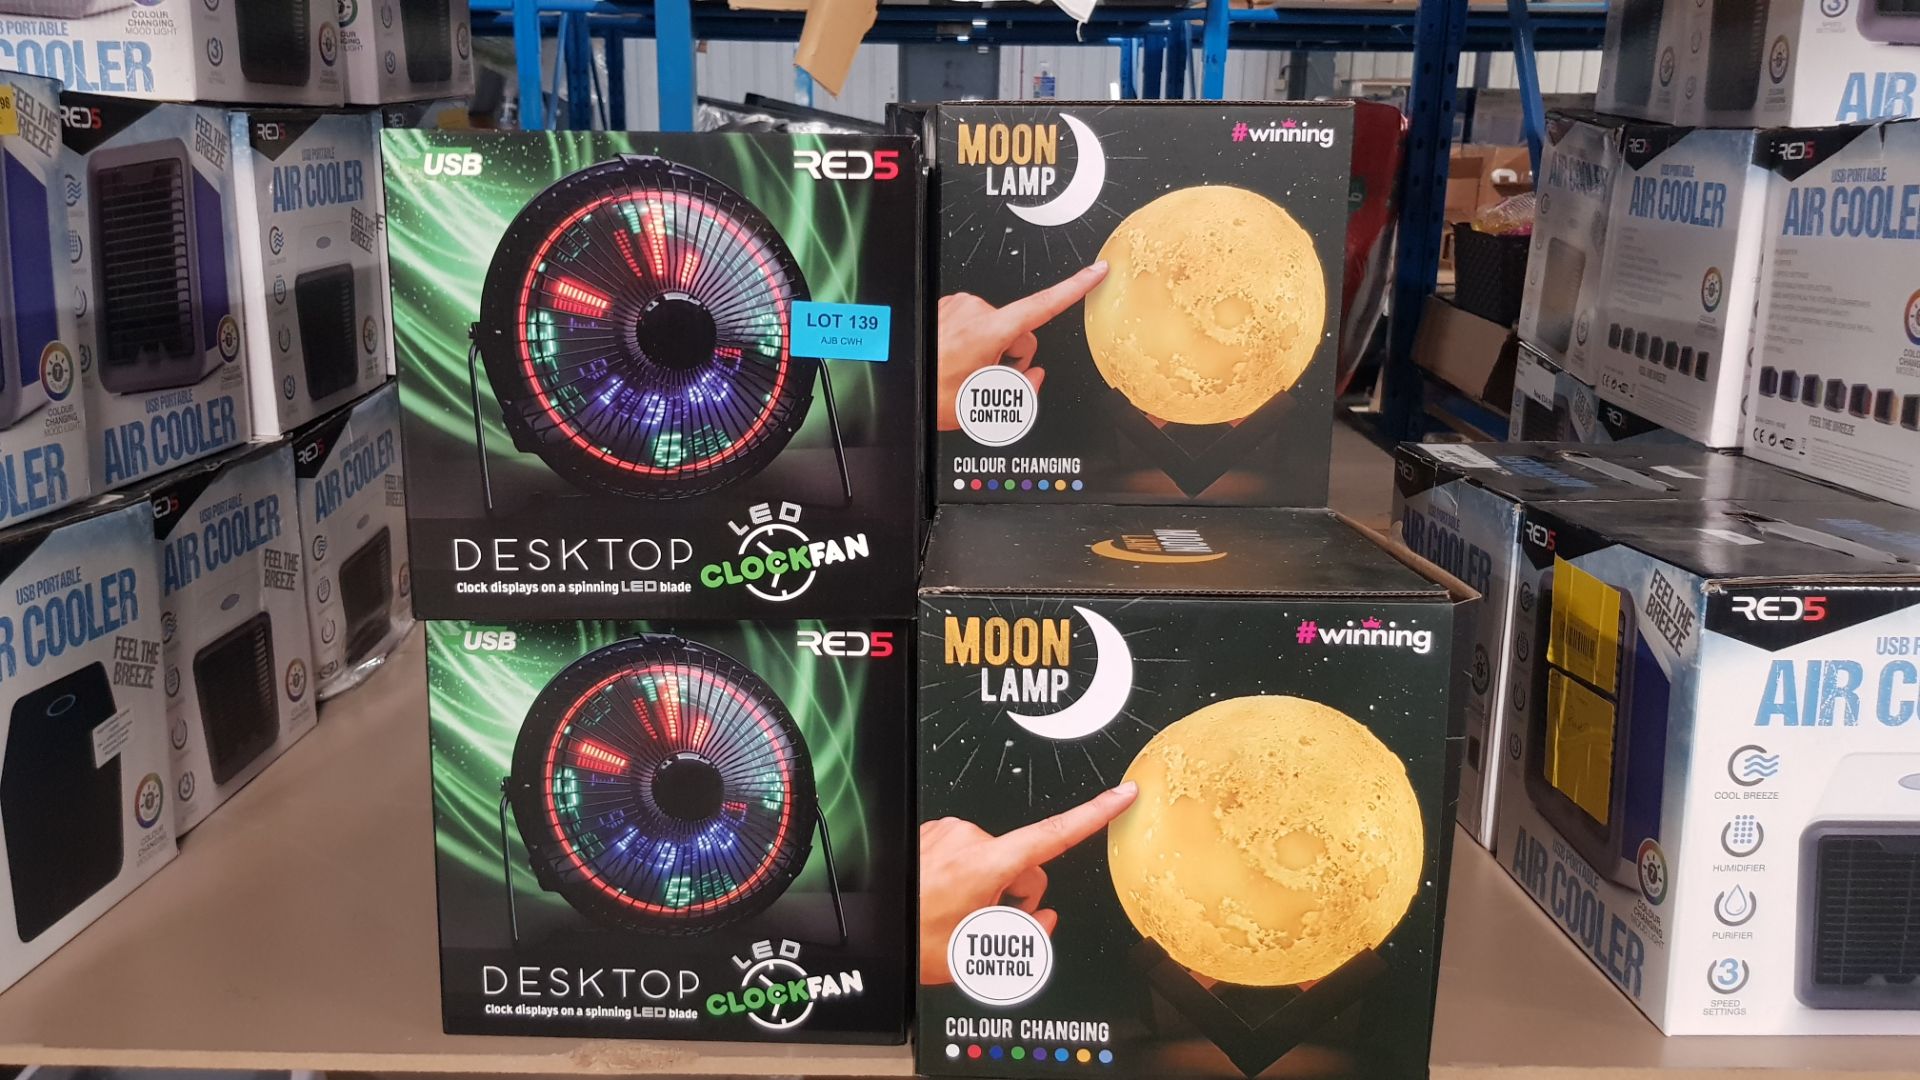 (6C) 17x Items. 7x #Winning Touch Control Moon Lamp. 10x Red5 Desktop LED Clockfan. (All Units Have - Image 3 of 3